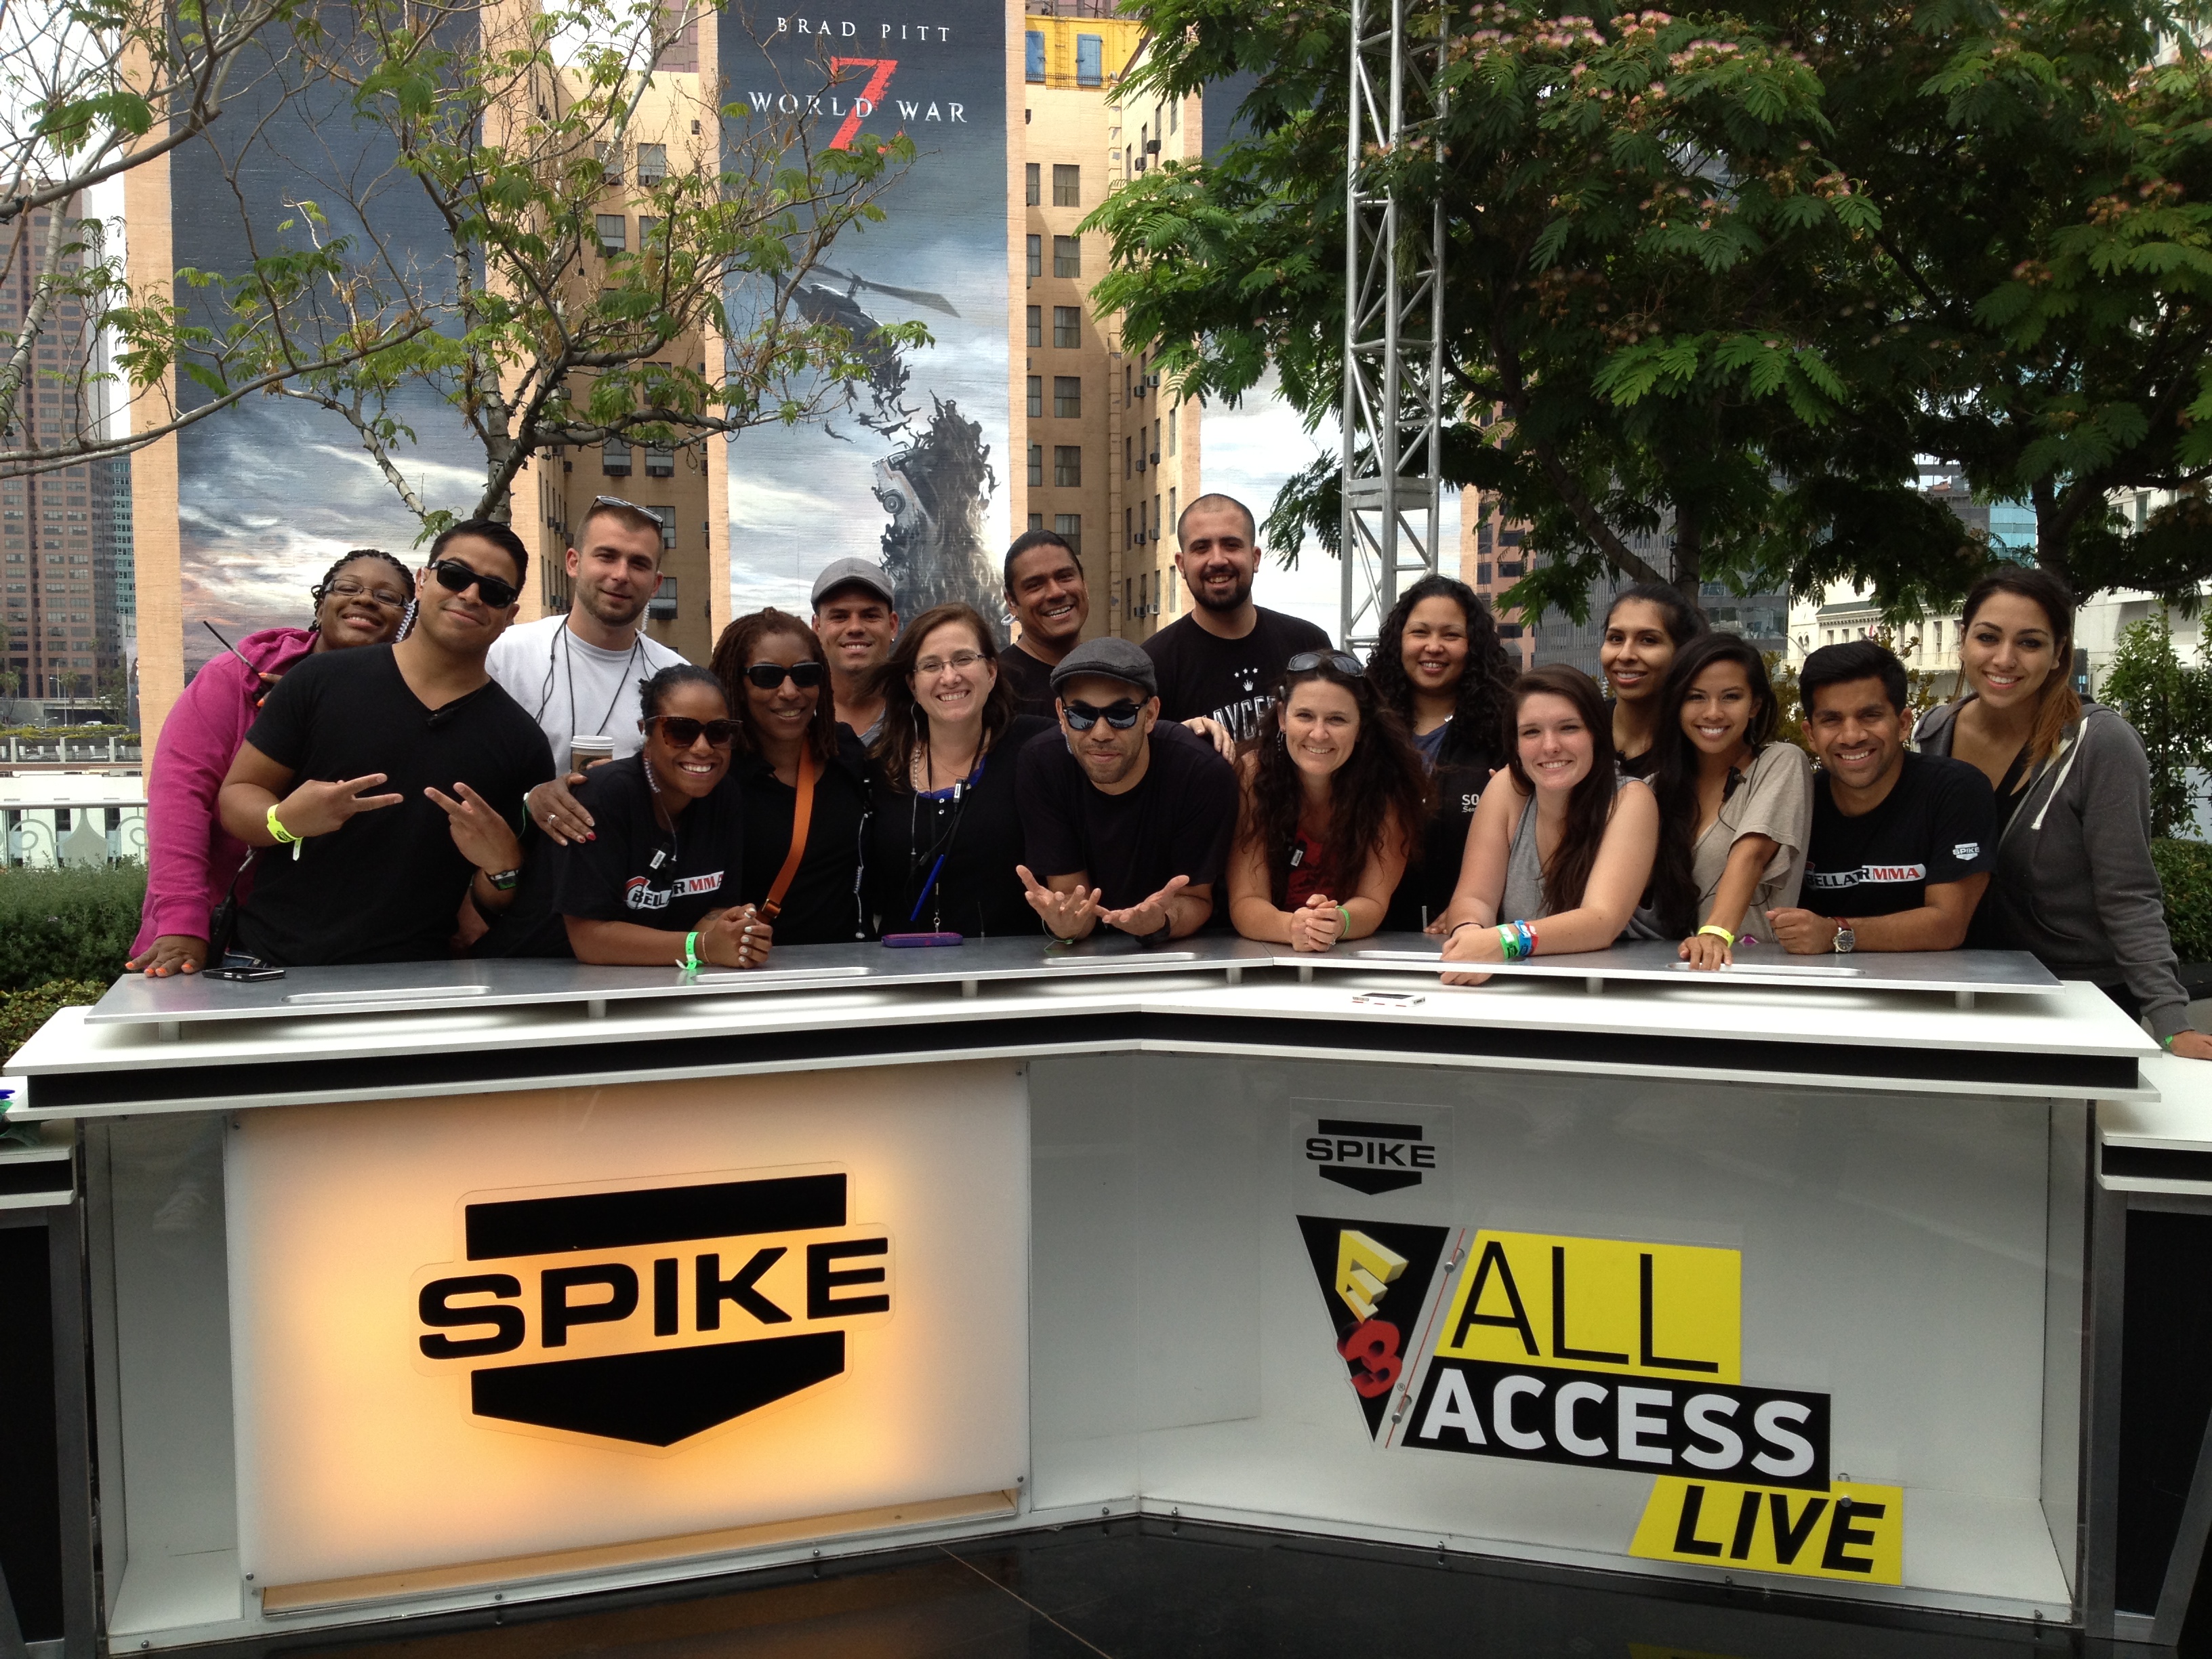 E3 All Access Live 2013 production department in a rare photo op.